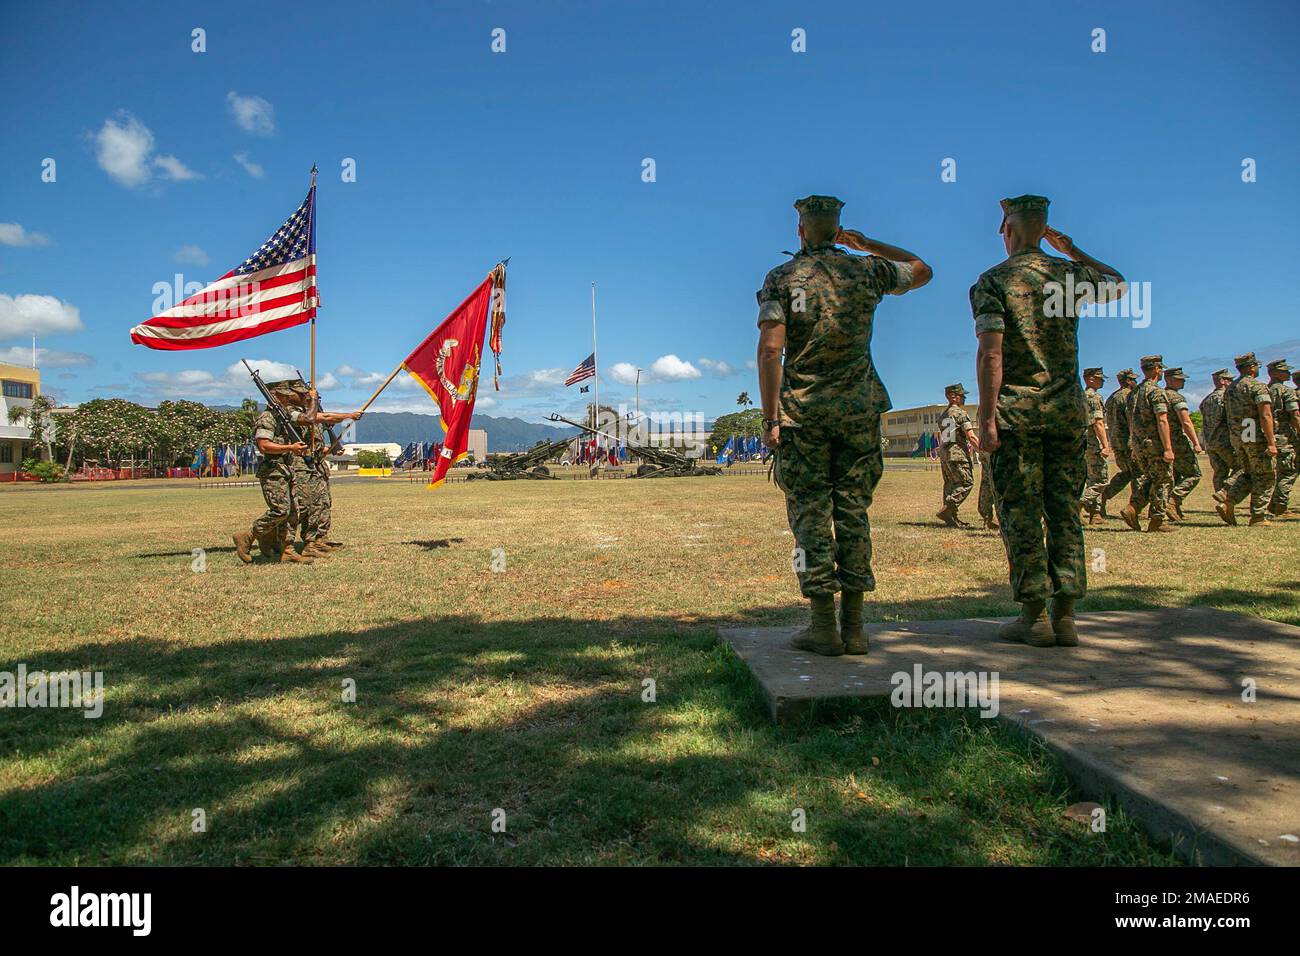 U.S. Marine Corps Lt. Col. Richard Neikirk, outgoing commanding officer, and Lt. Col. Joseph Gill II, incoming commanding officer, 1st Battalion, 12th Marine Regiment, salute the colors during the unit’s change of command ceremony on Marine Corps Base Hawaii, May 26, 2022. LtCol. Neikirk relinquished command of 1st Battalion, 12th Marines to Lt. Col. Gill II. Stock Photo